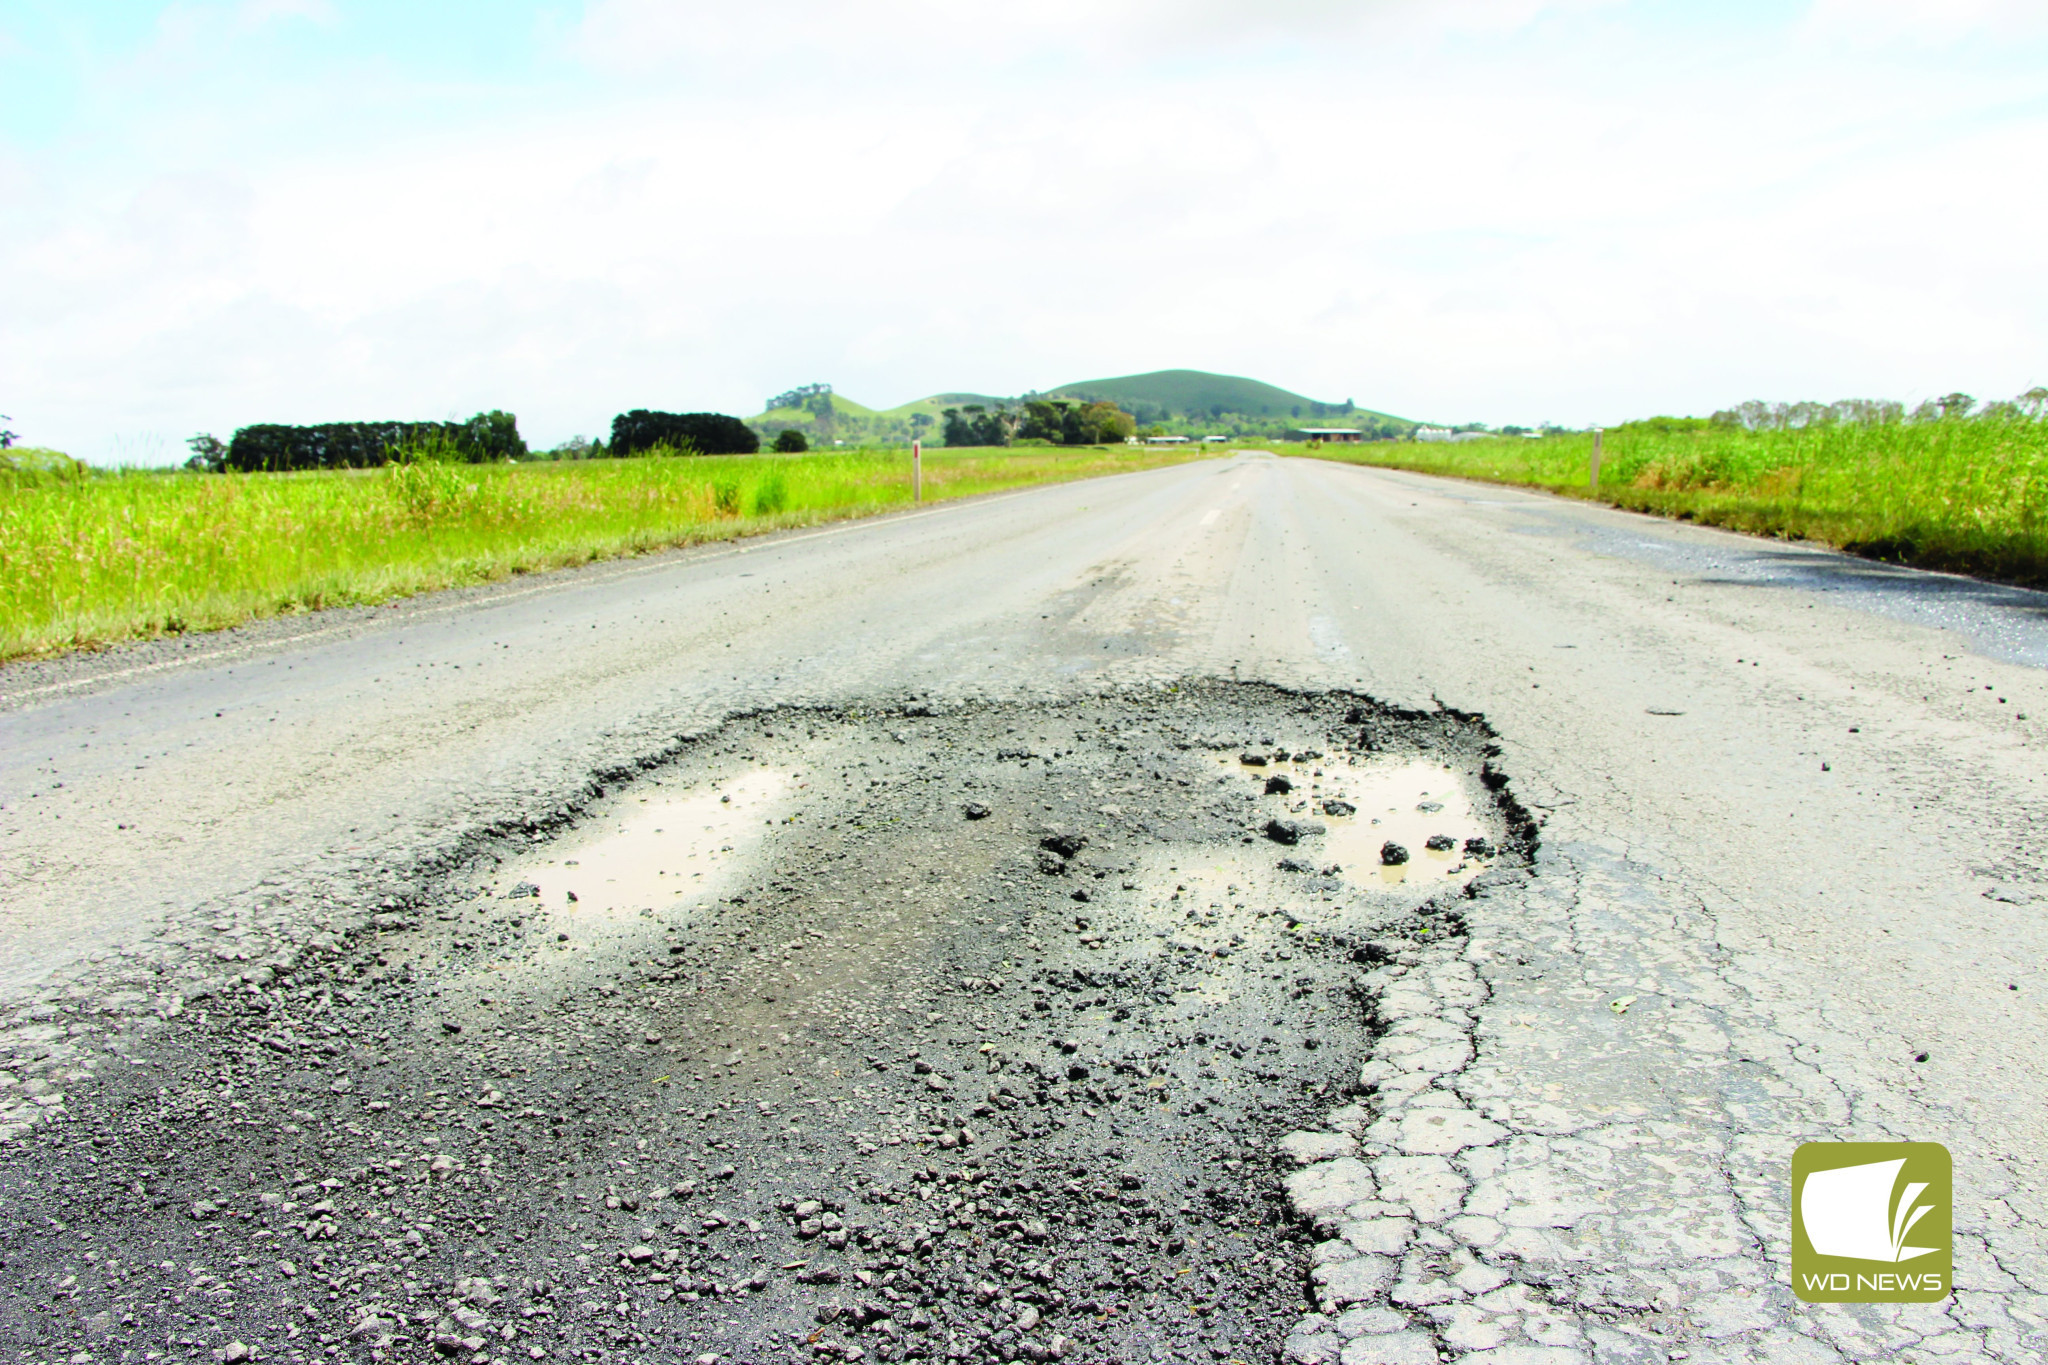 Damage: Mackinnons Bridge Road has been among the most damaged roads in the region over the past few years, with potholes consistently causing issues for drivers.